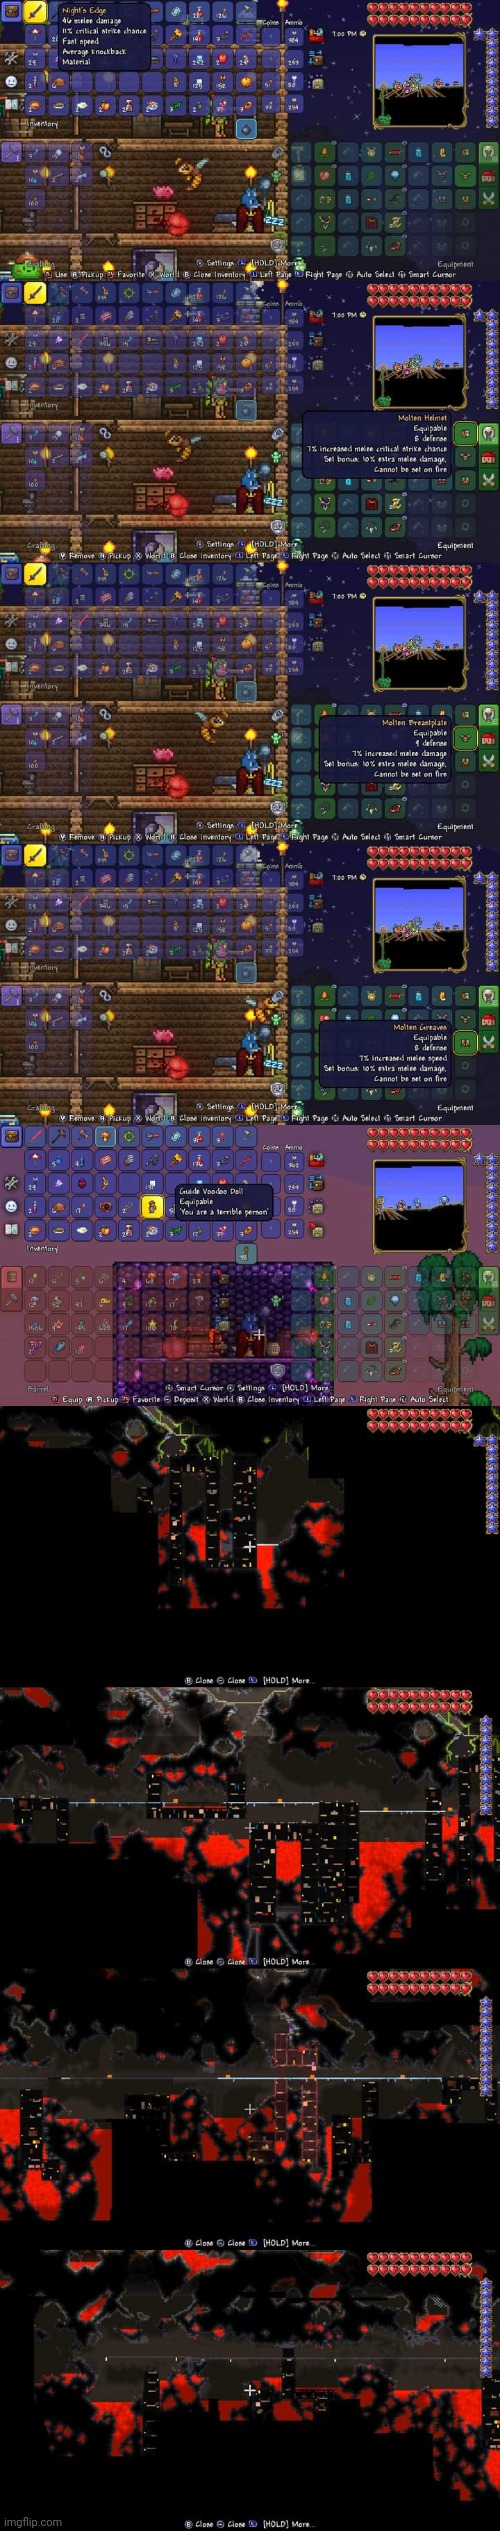 It's time | image tagged in terraria,gaming,nintendo switch,screenshot | made w/ Imgflip meme maker